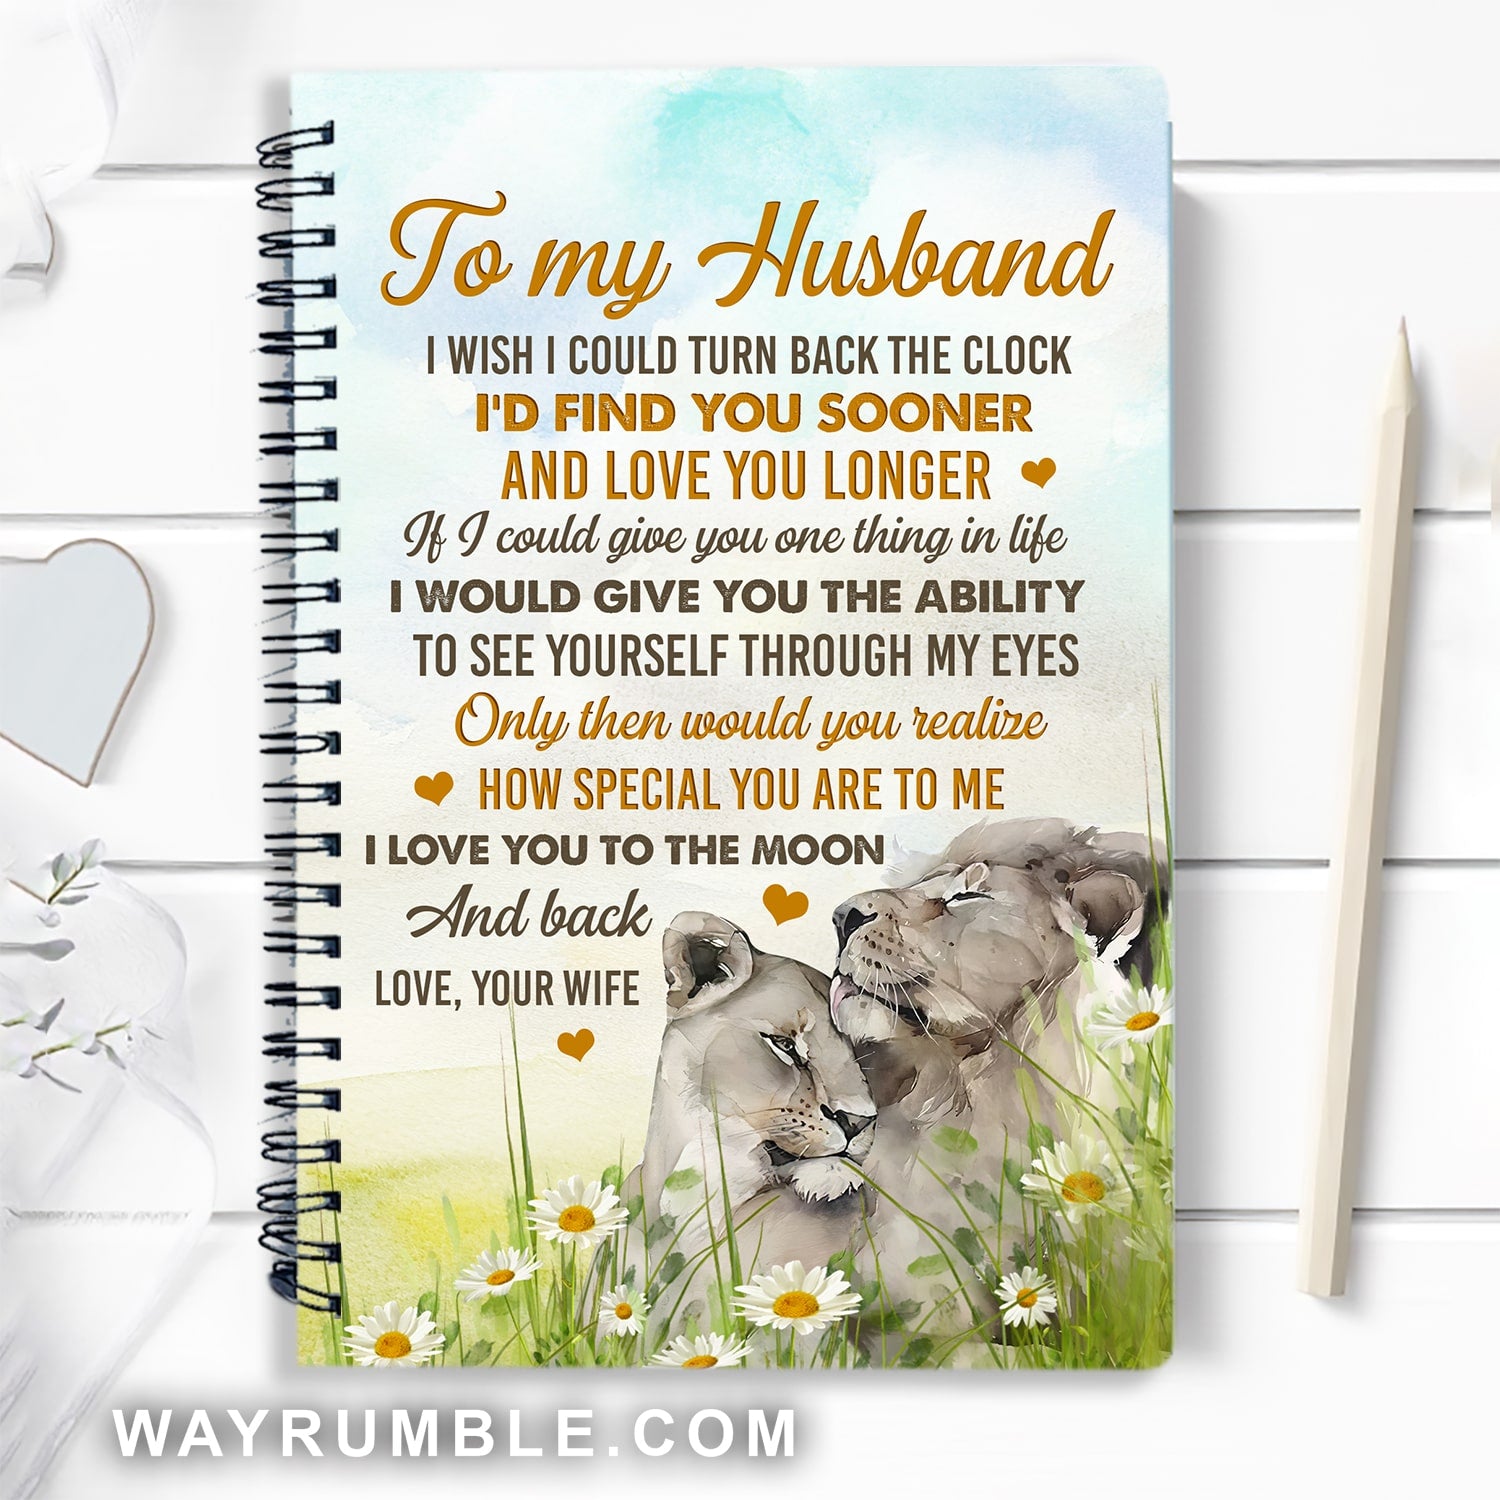 To my husband, I love you to the moon and back - Lion painting,  Spiral Journal